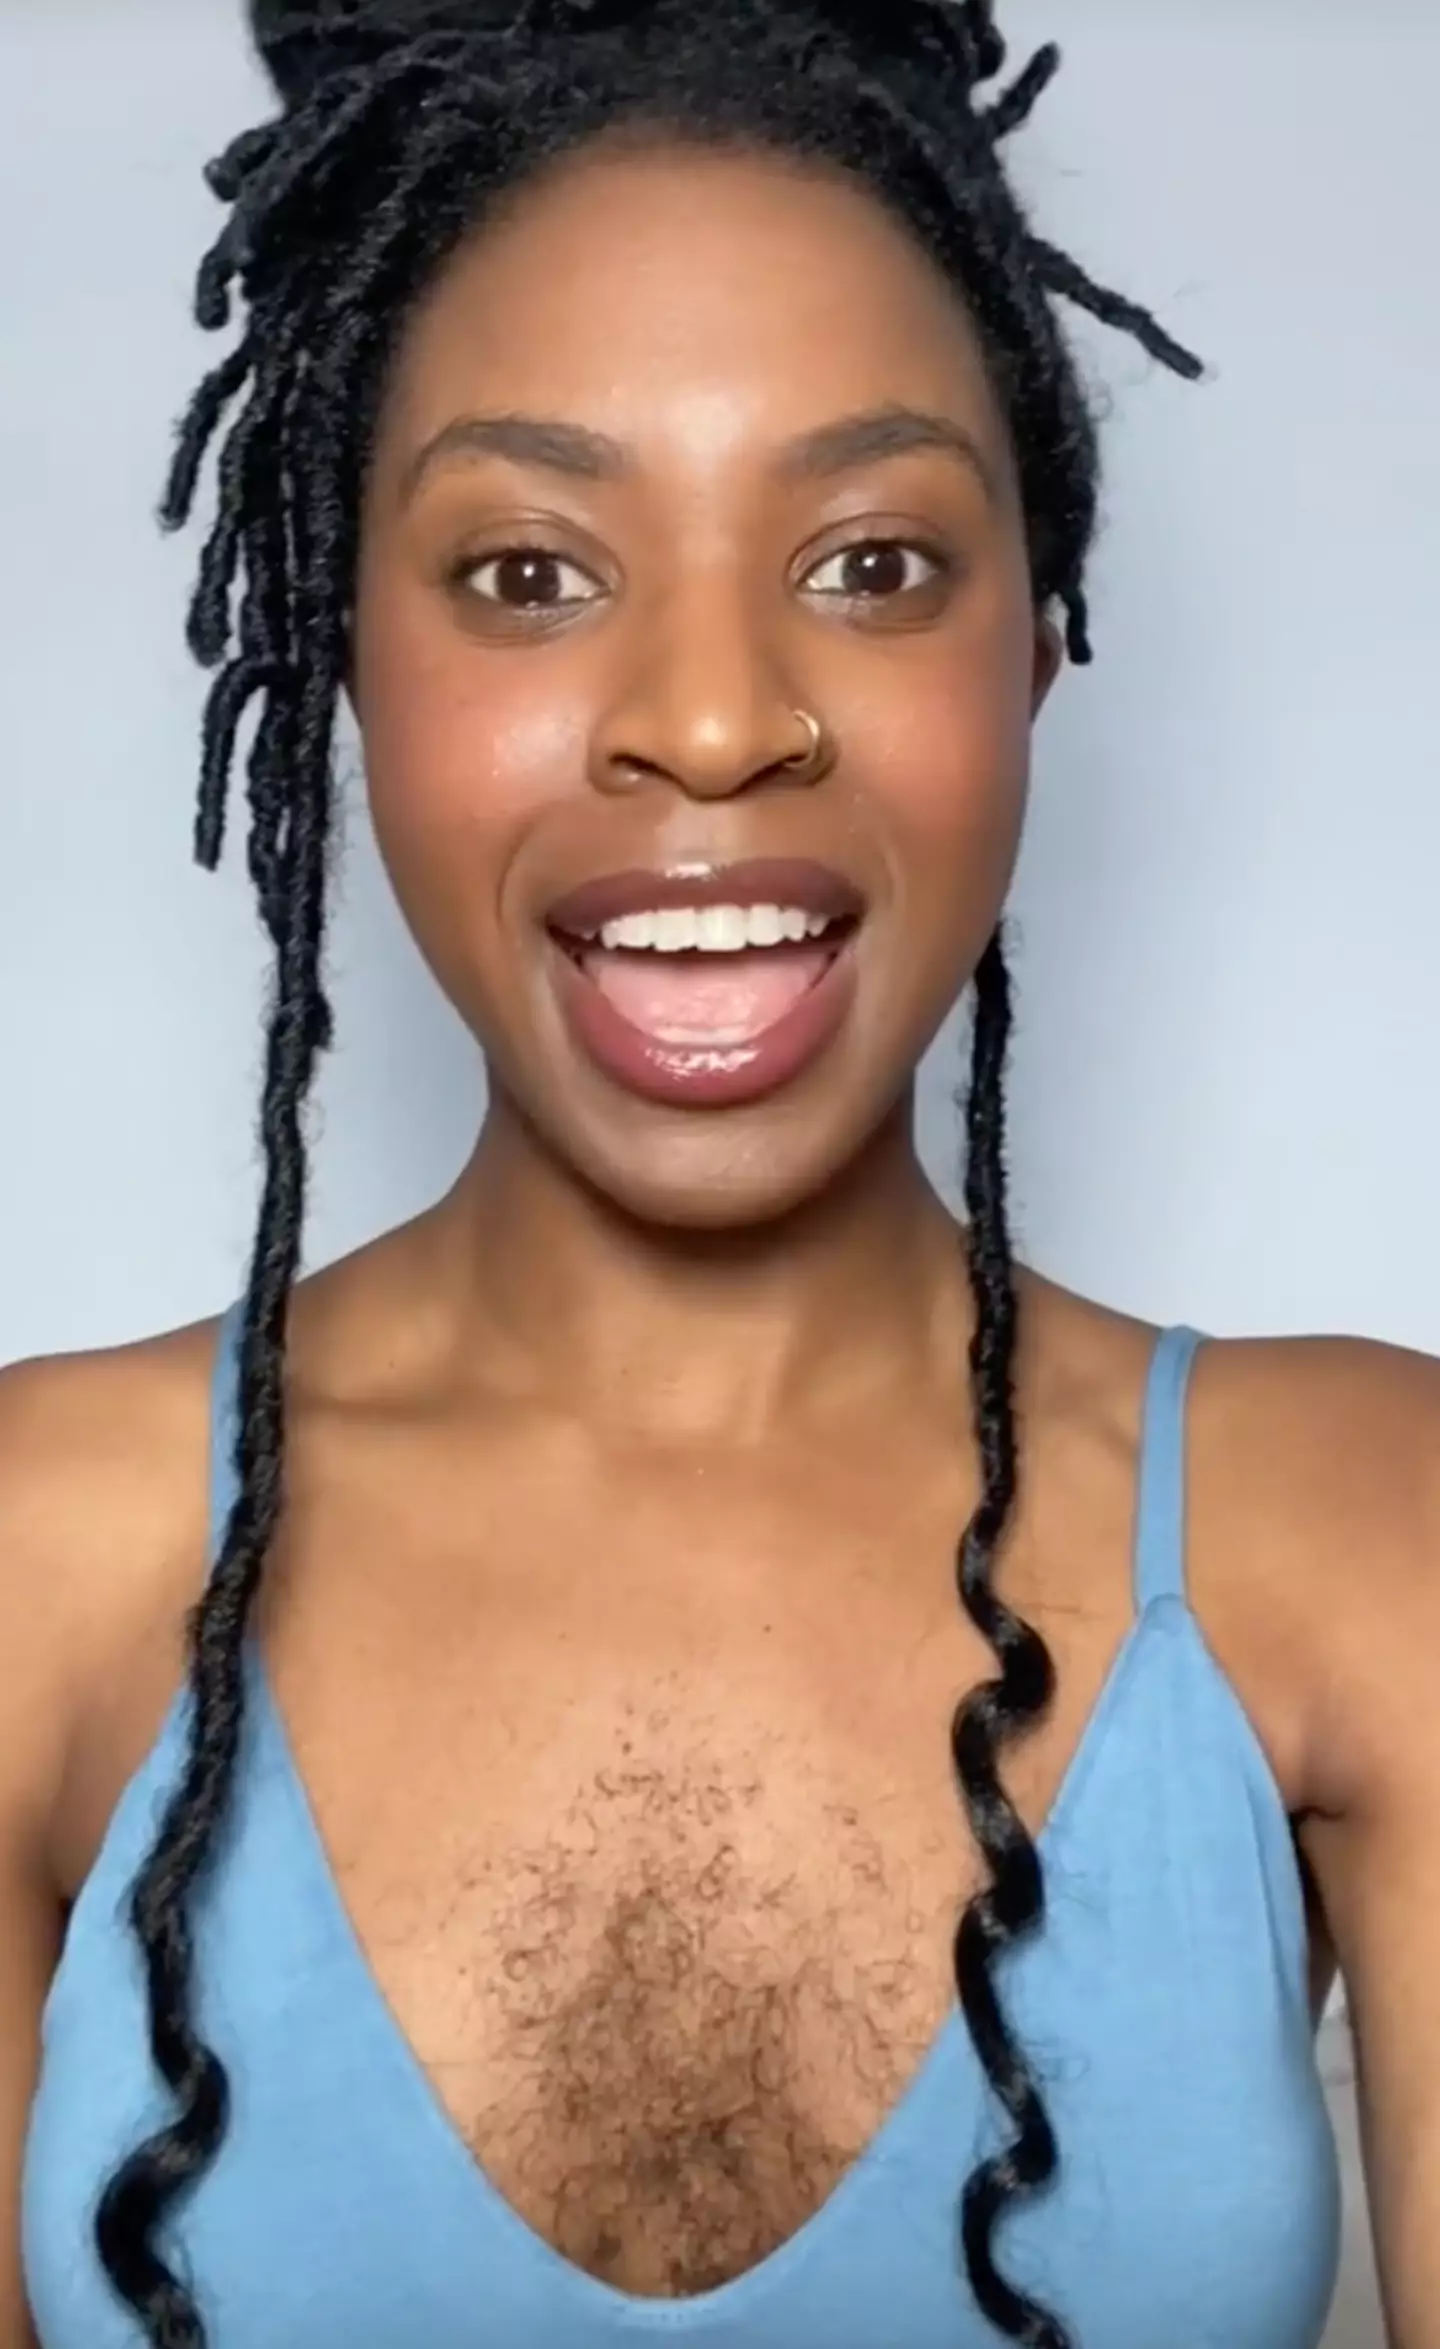 Esie is encouraging others to 'embrace' their body hair.